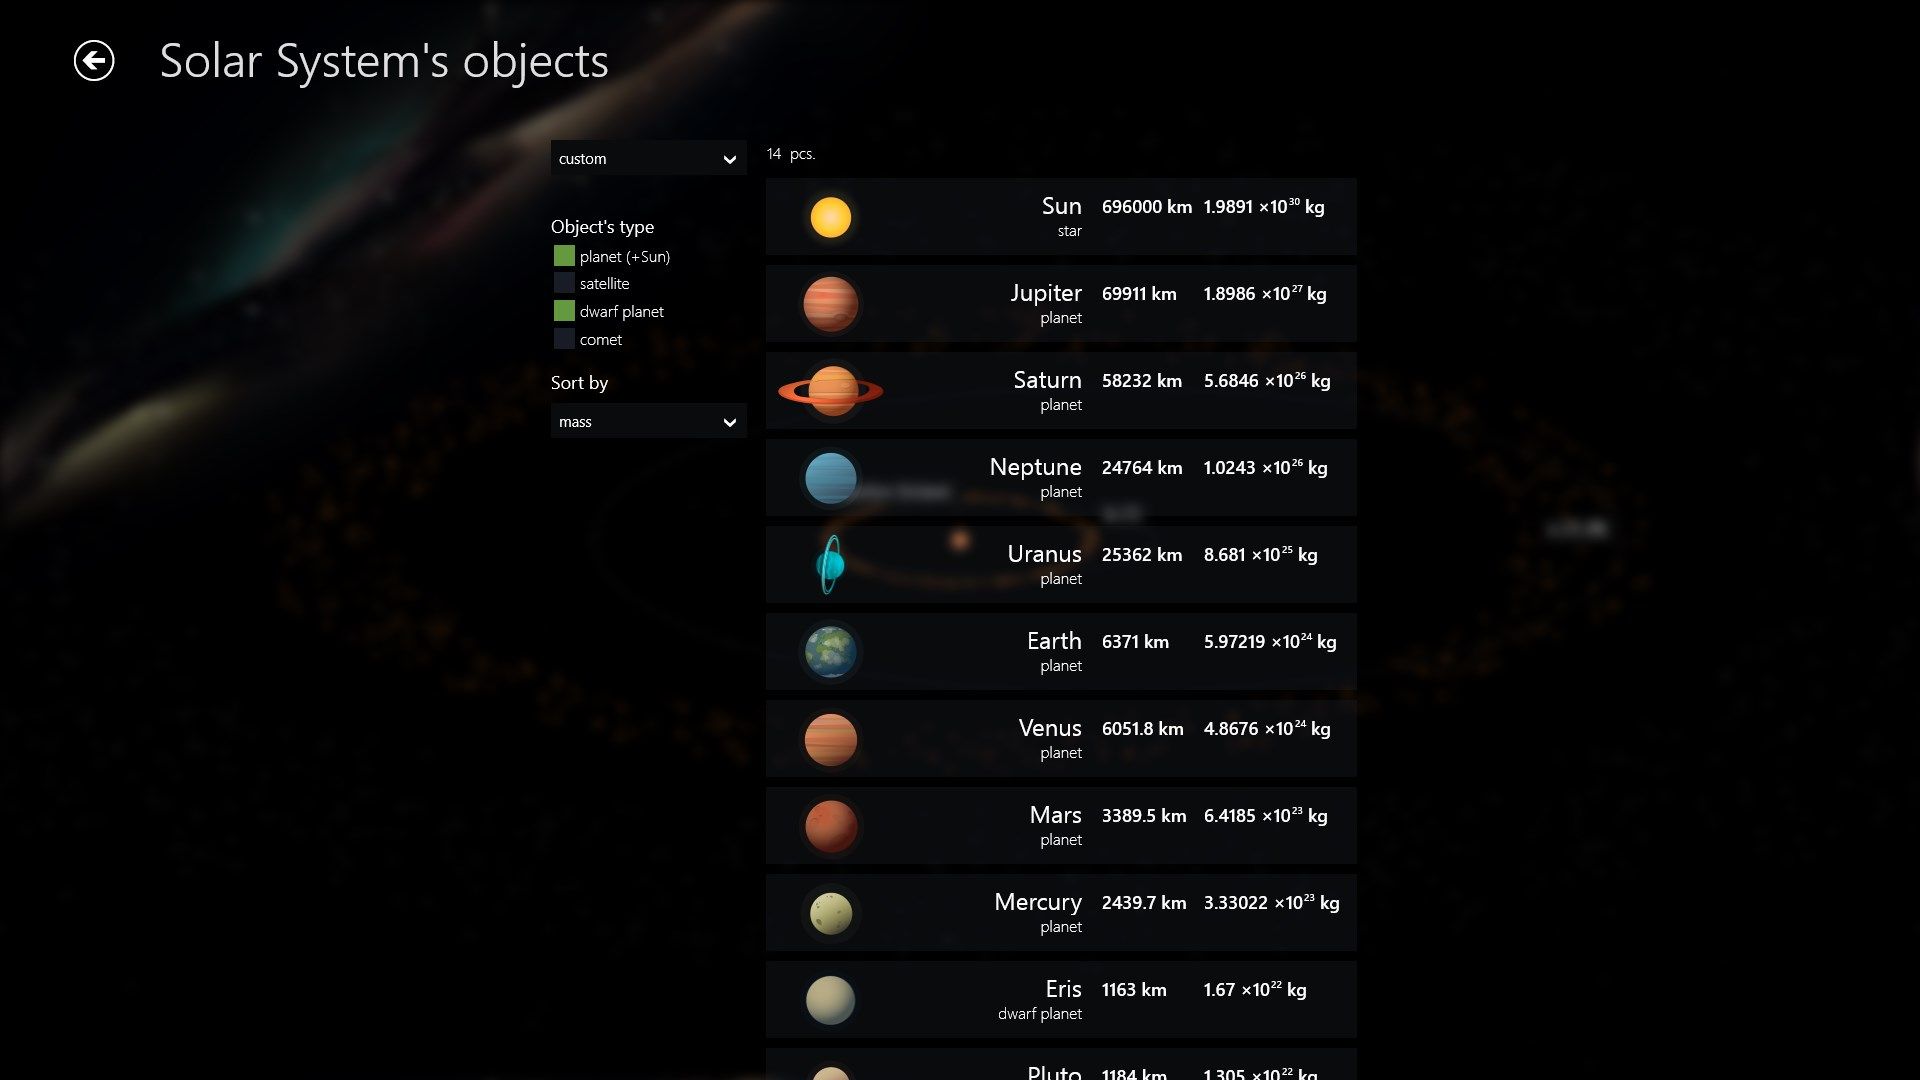 Open up any Solar System's object